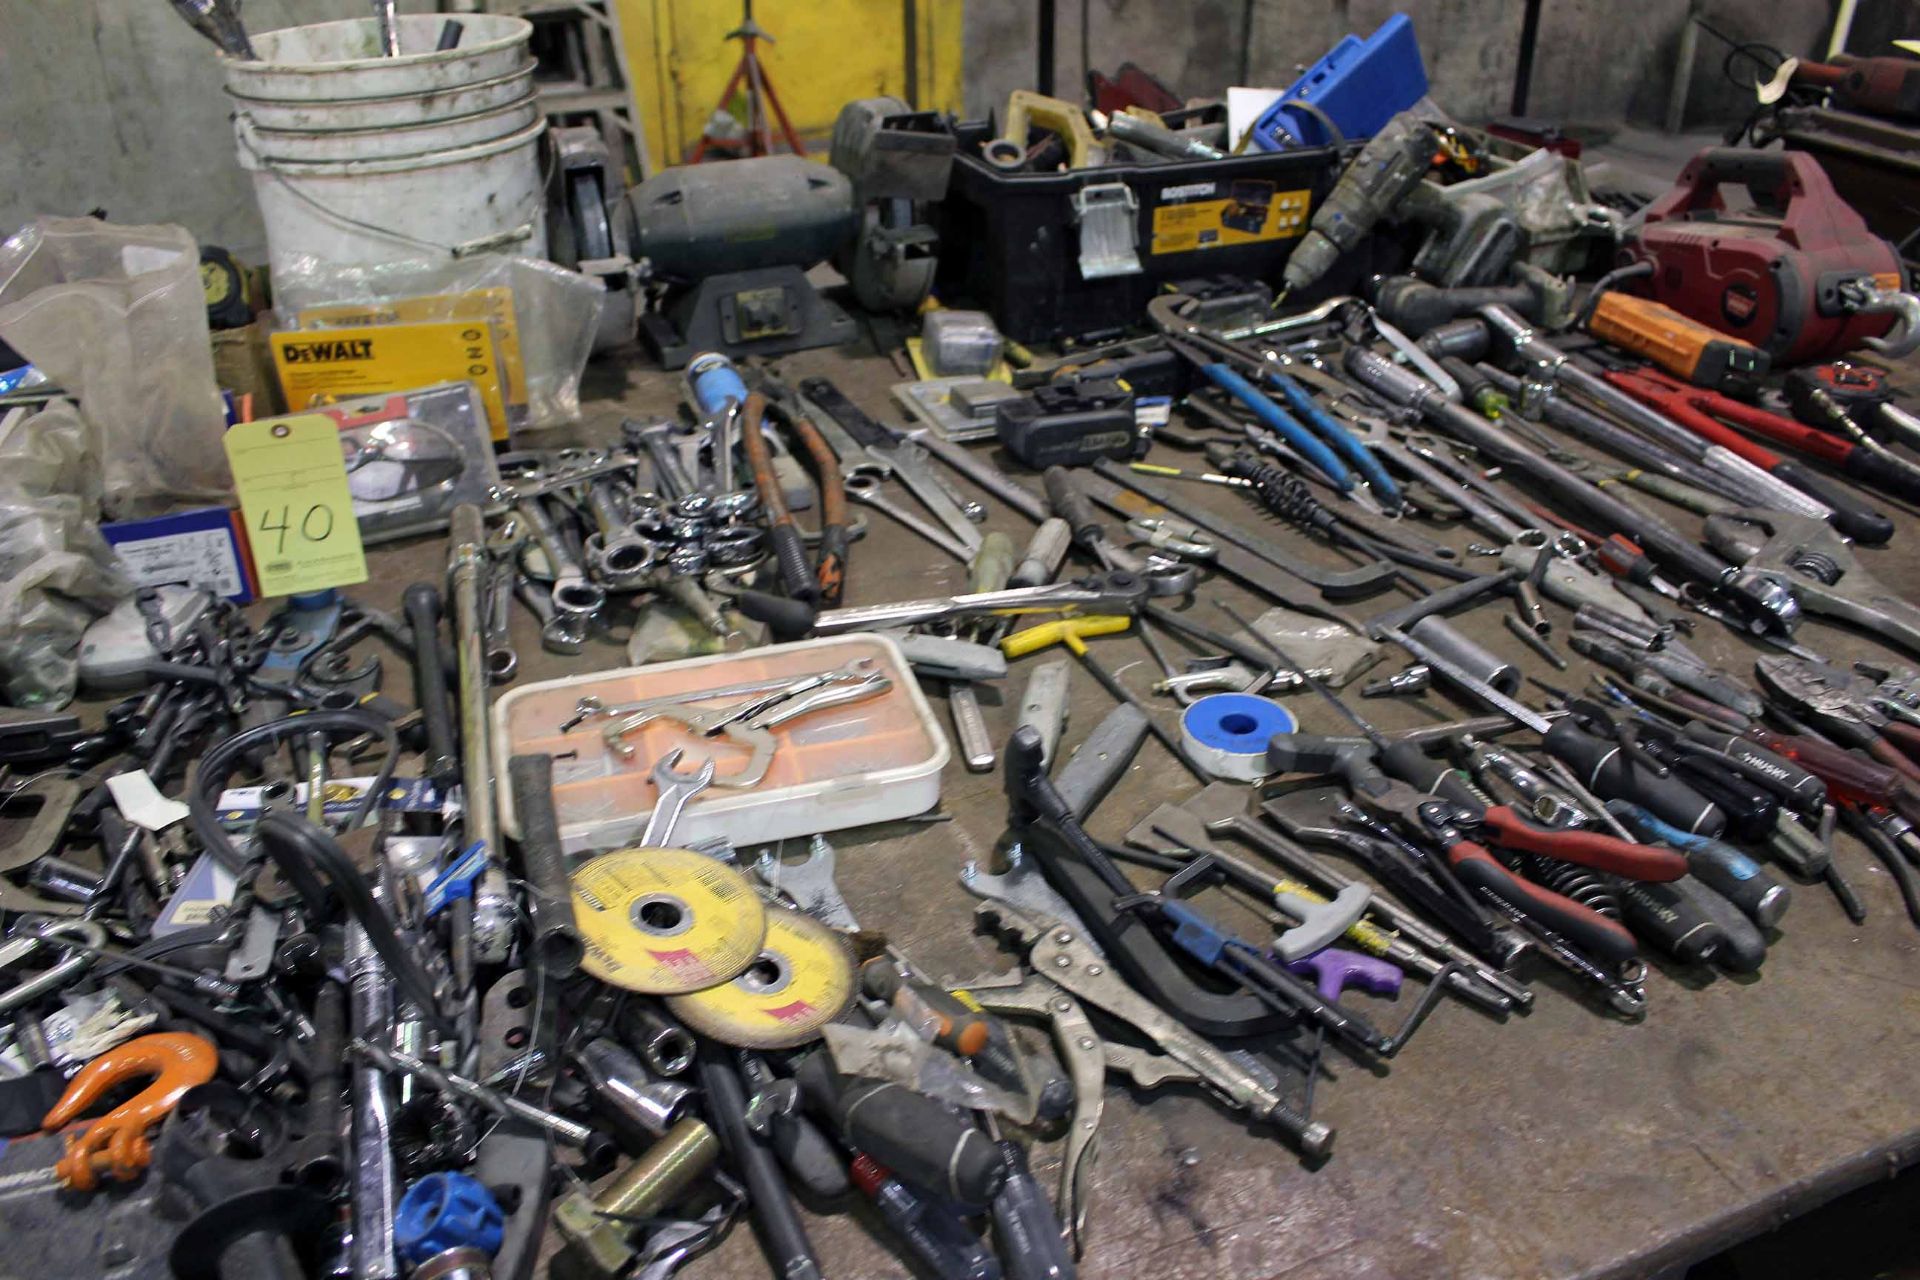 LOT CONSISTING OF: misc. hand tools, wrenches, pliers, sockets, electric drills, etc. - Image 2 of 4